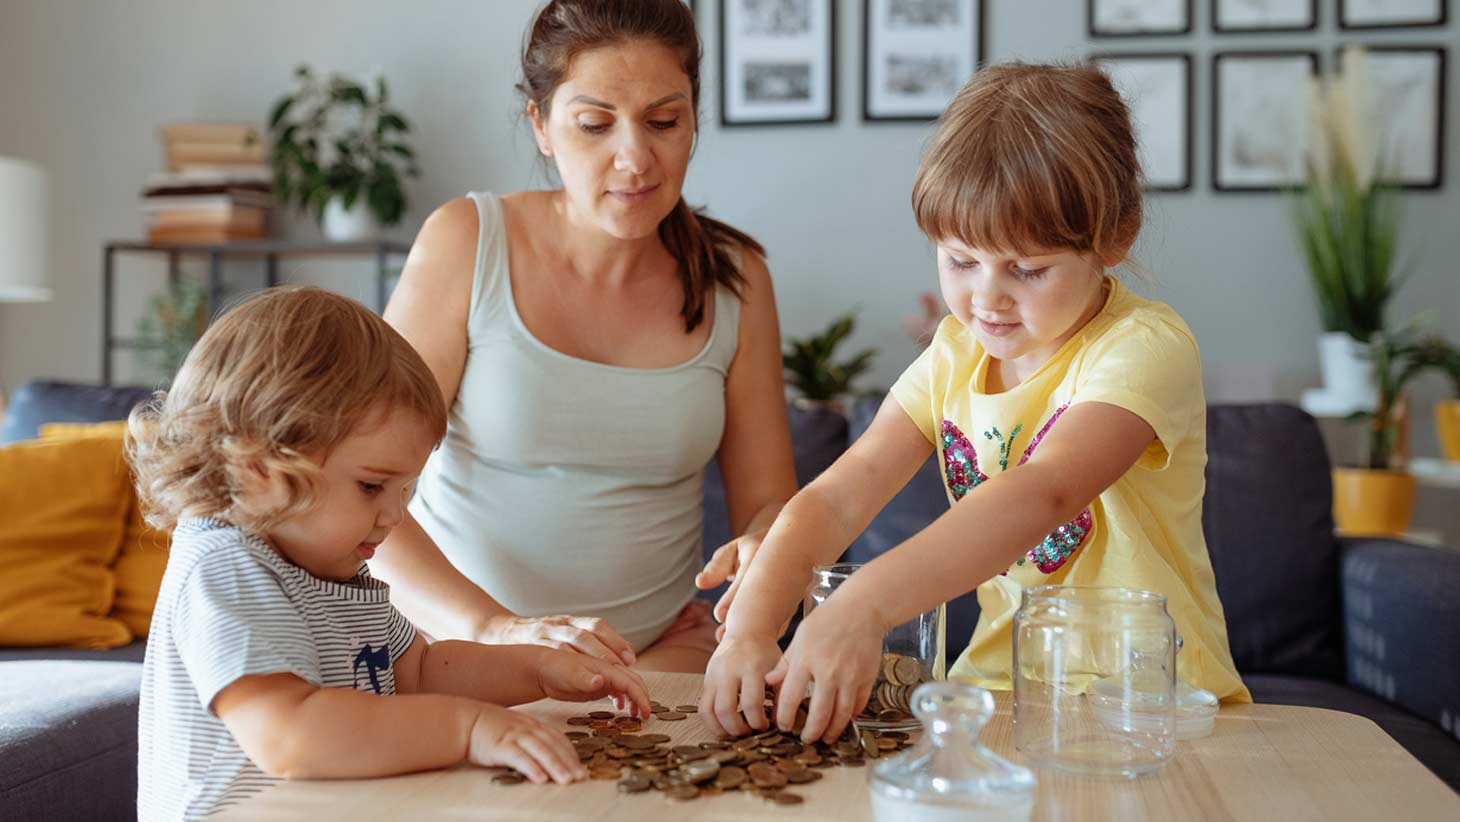 Incentives for Making Children Want to Save Money